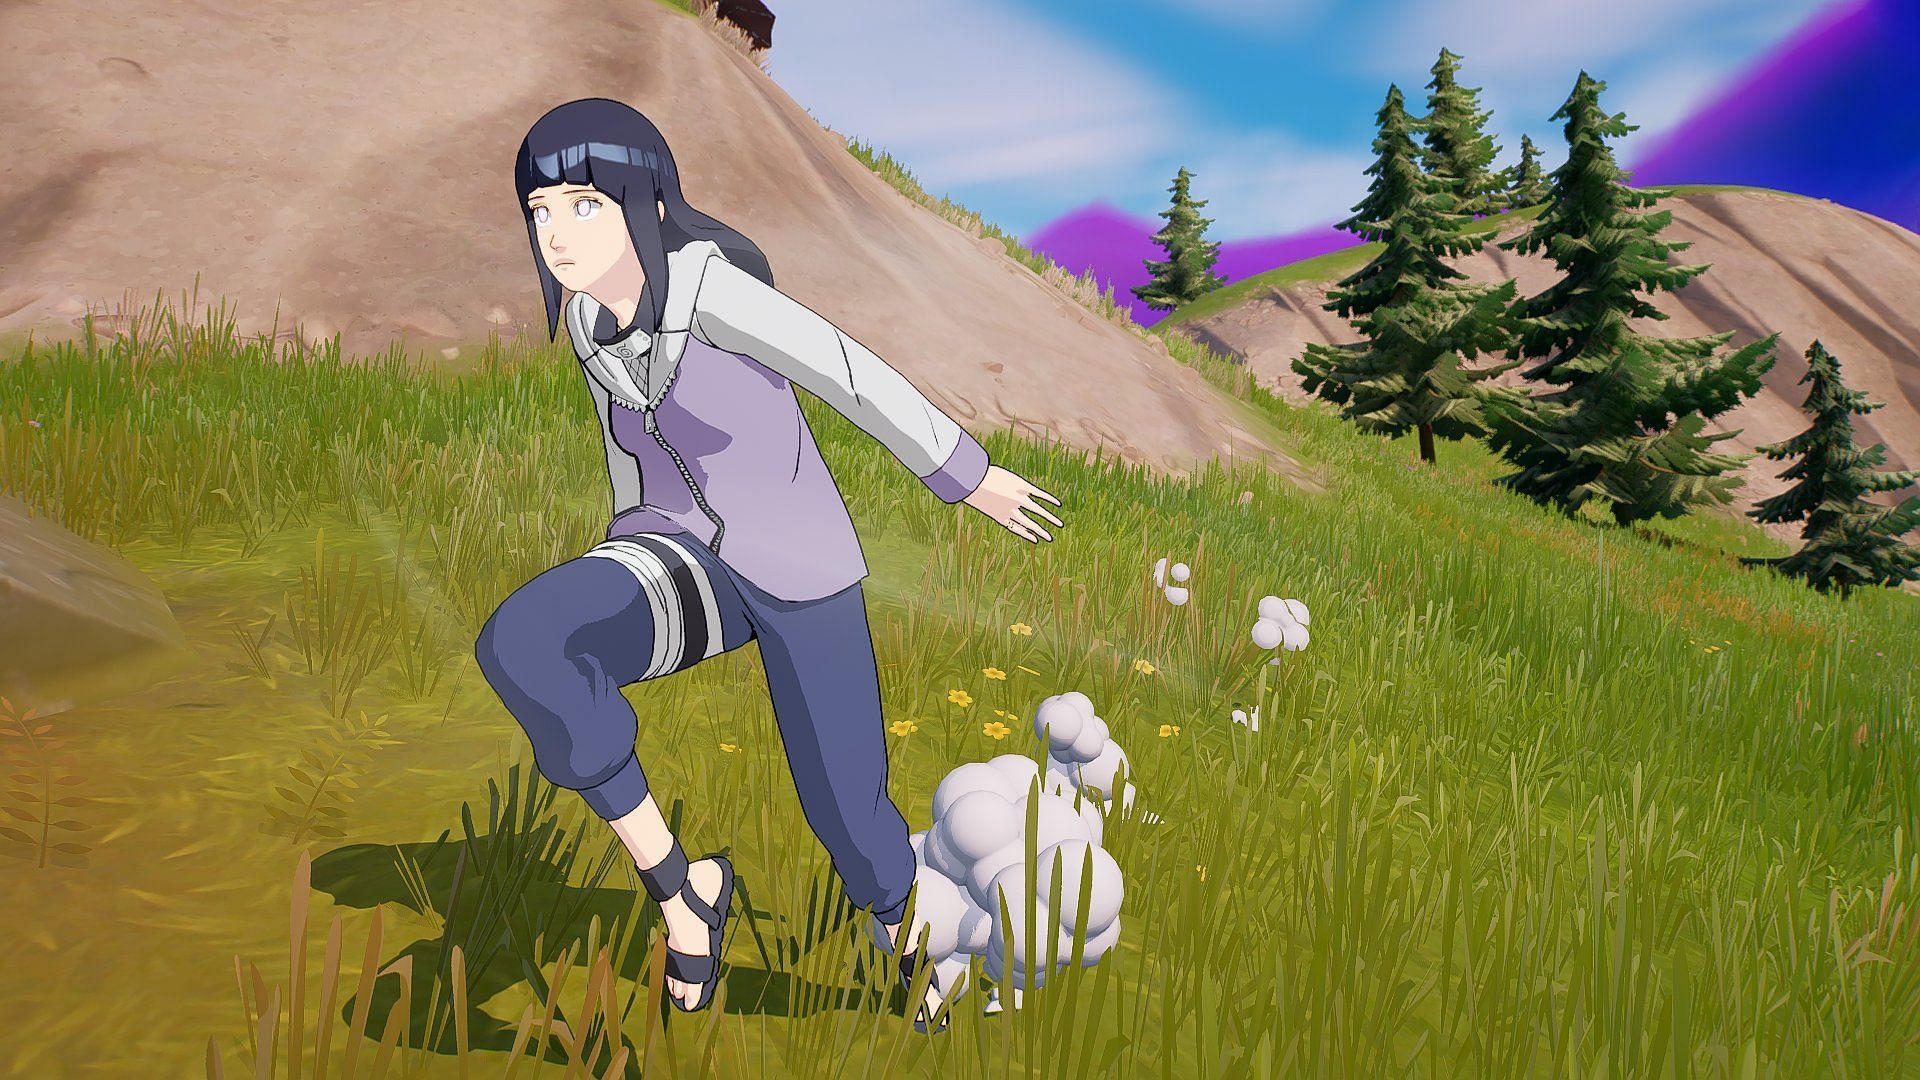 Fans complain about Hinata&#039;s design in Fortnite, and rightfully so (Image via marvidun/Twitter)